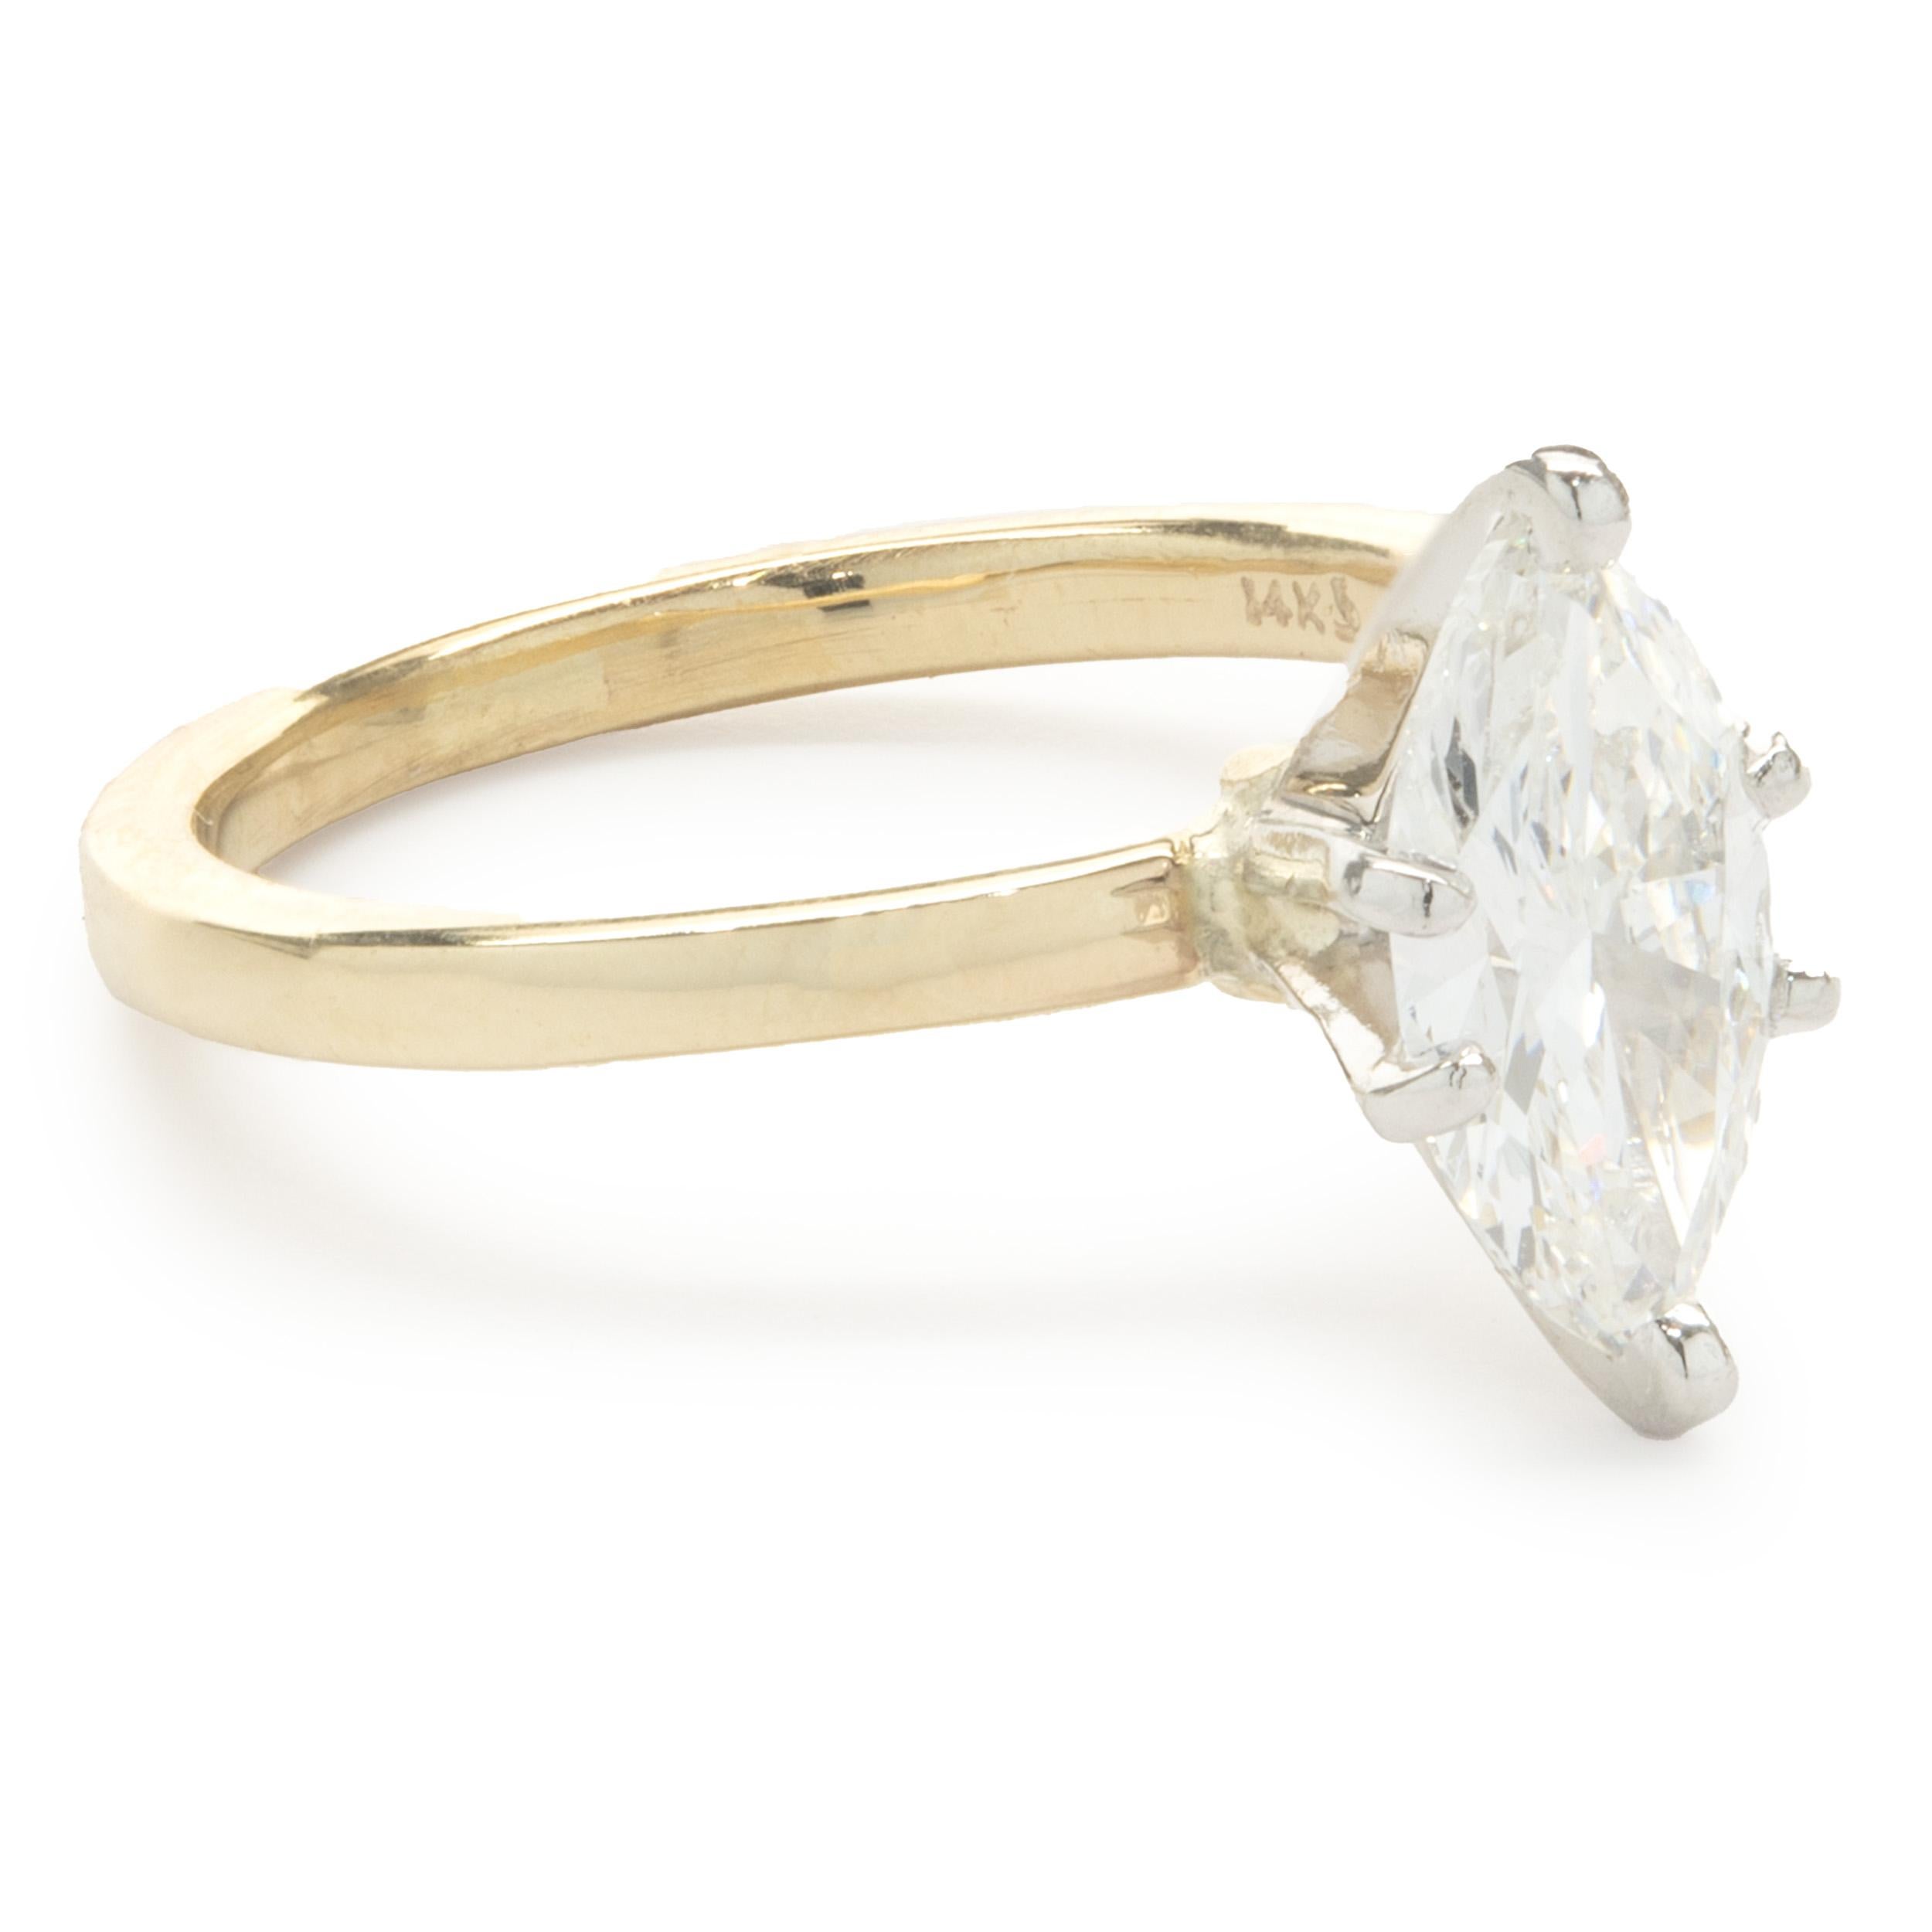 Designer: custom
Material: 14K yellow gold
Diamond: marquise cut = 1.00ct
Color: H
Clarity: SI2
Ring Size: 5 (please allow two additional shipping days for sizing requests)
Dimensions: ring top measures 11.5mm 
Weight: 2.90 grams